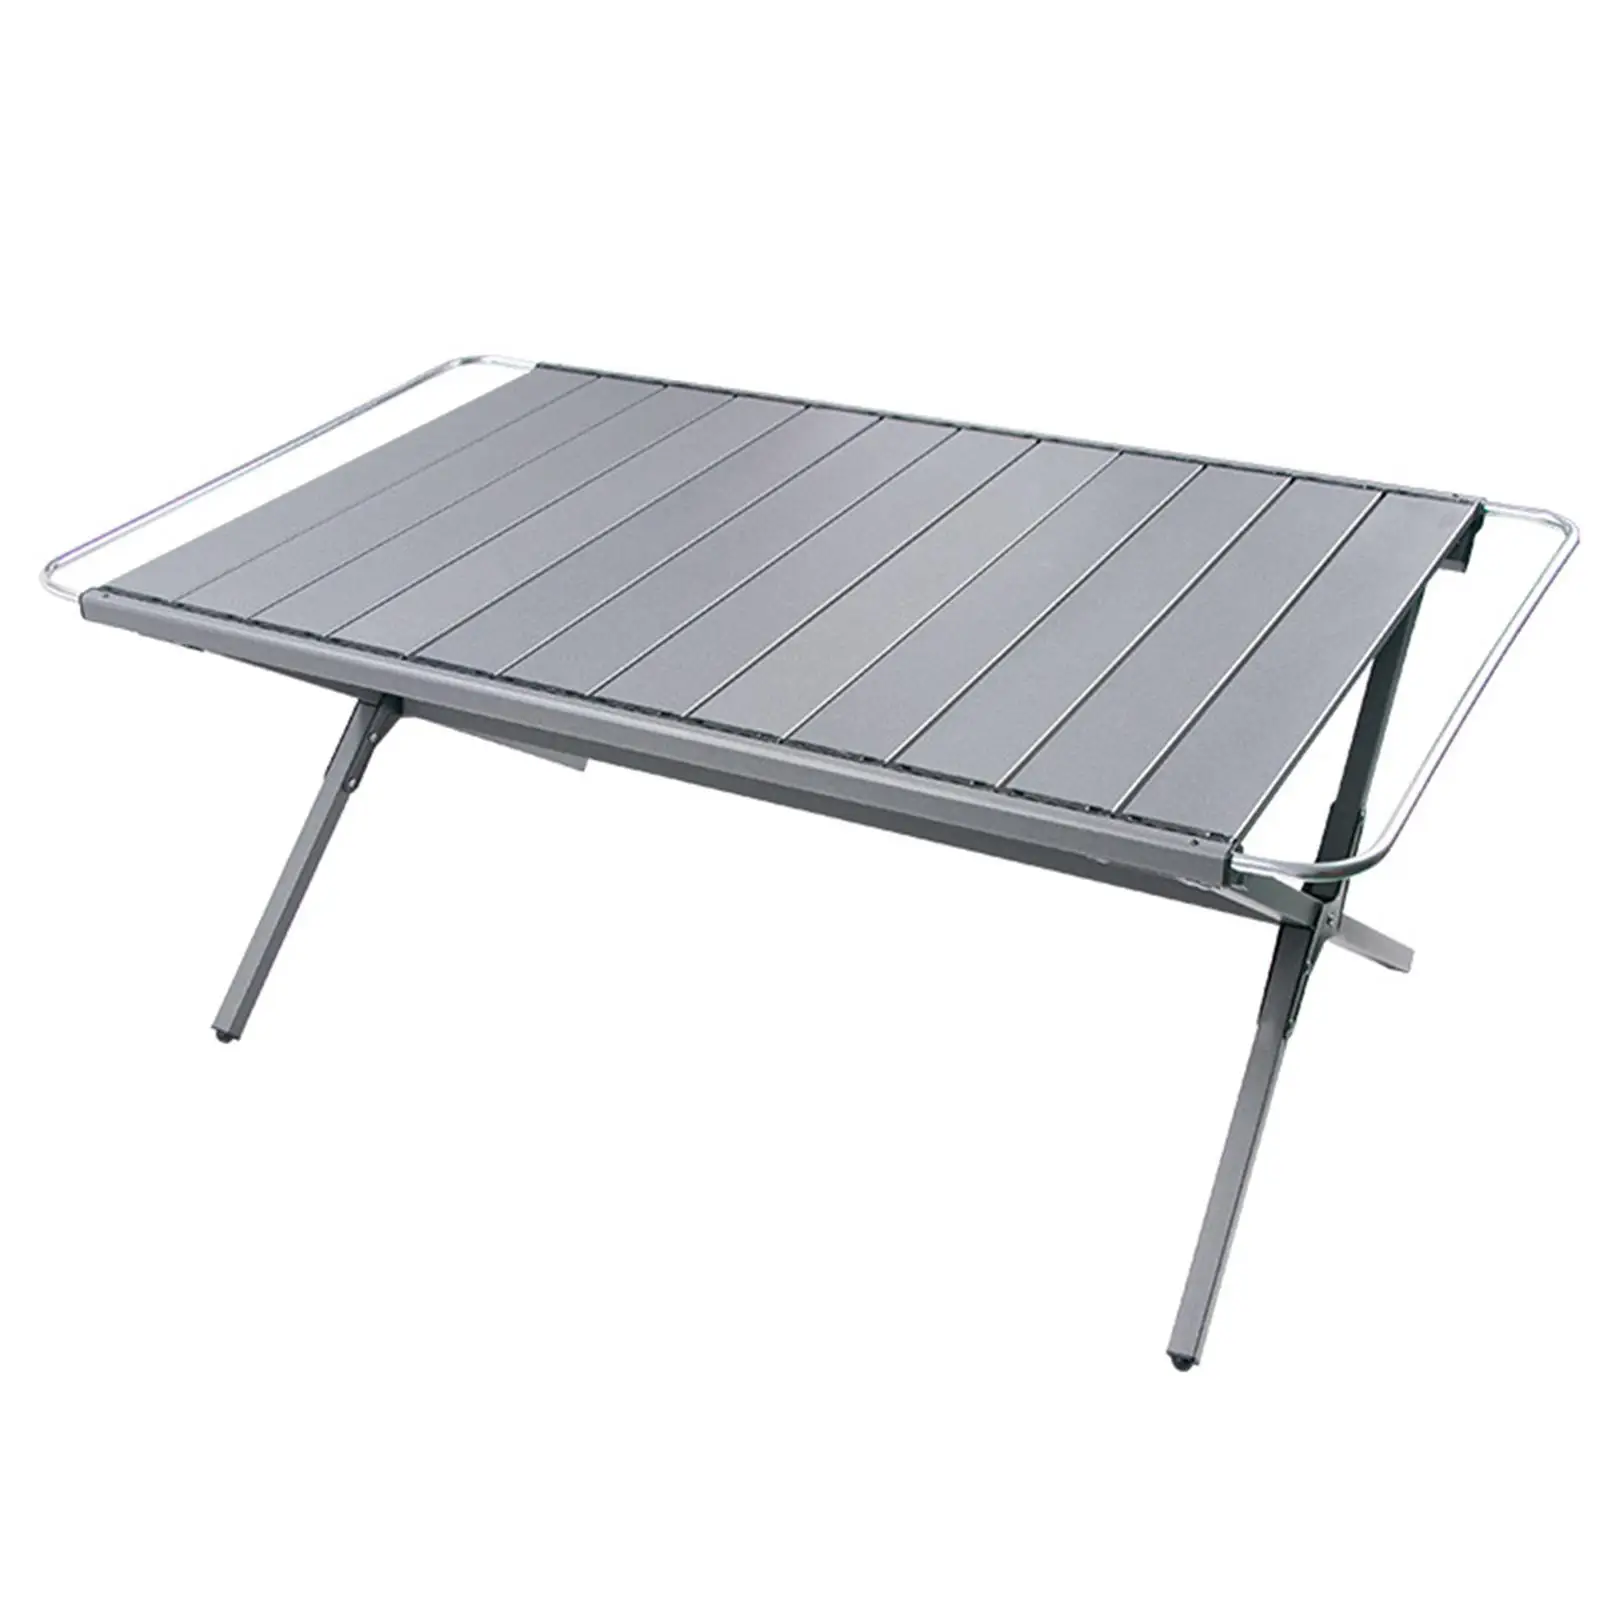 Camping Table Aluminum Alloy Folding Table Ultralight Travel Table Portable Picnic Table for BBQ Hiking Outdoor Balcony Fishing